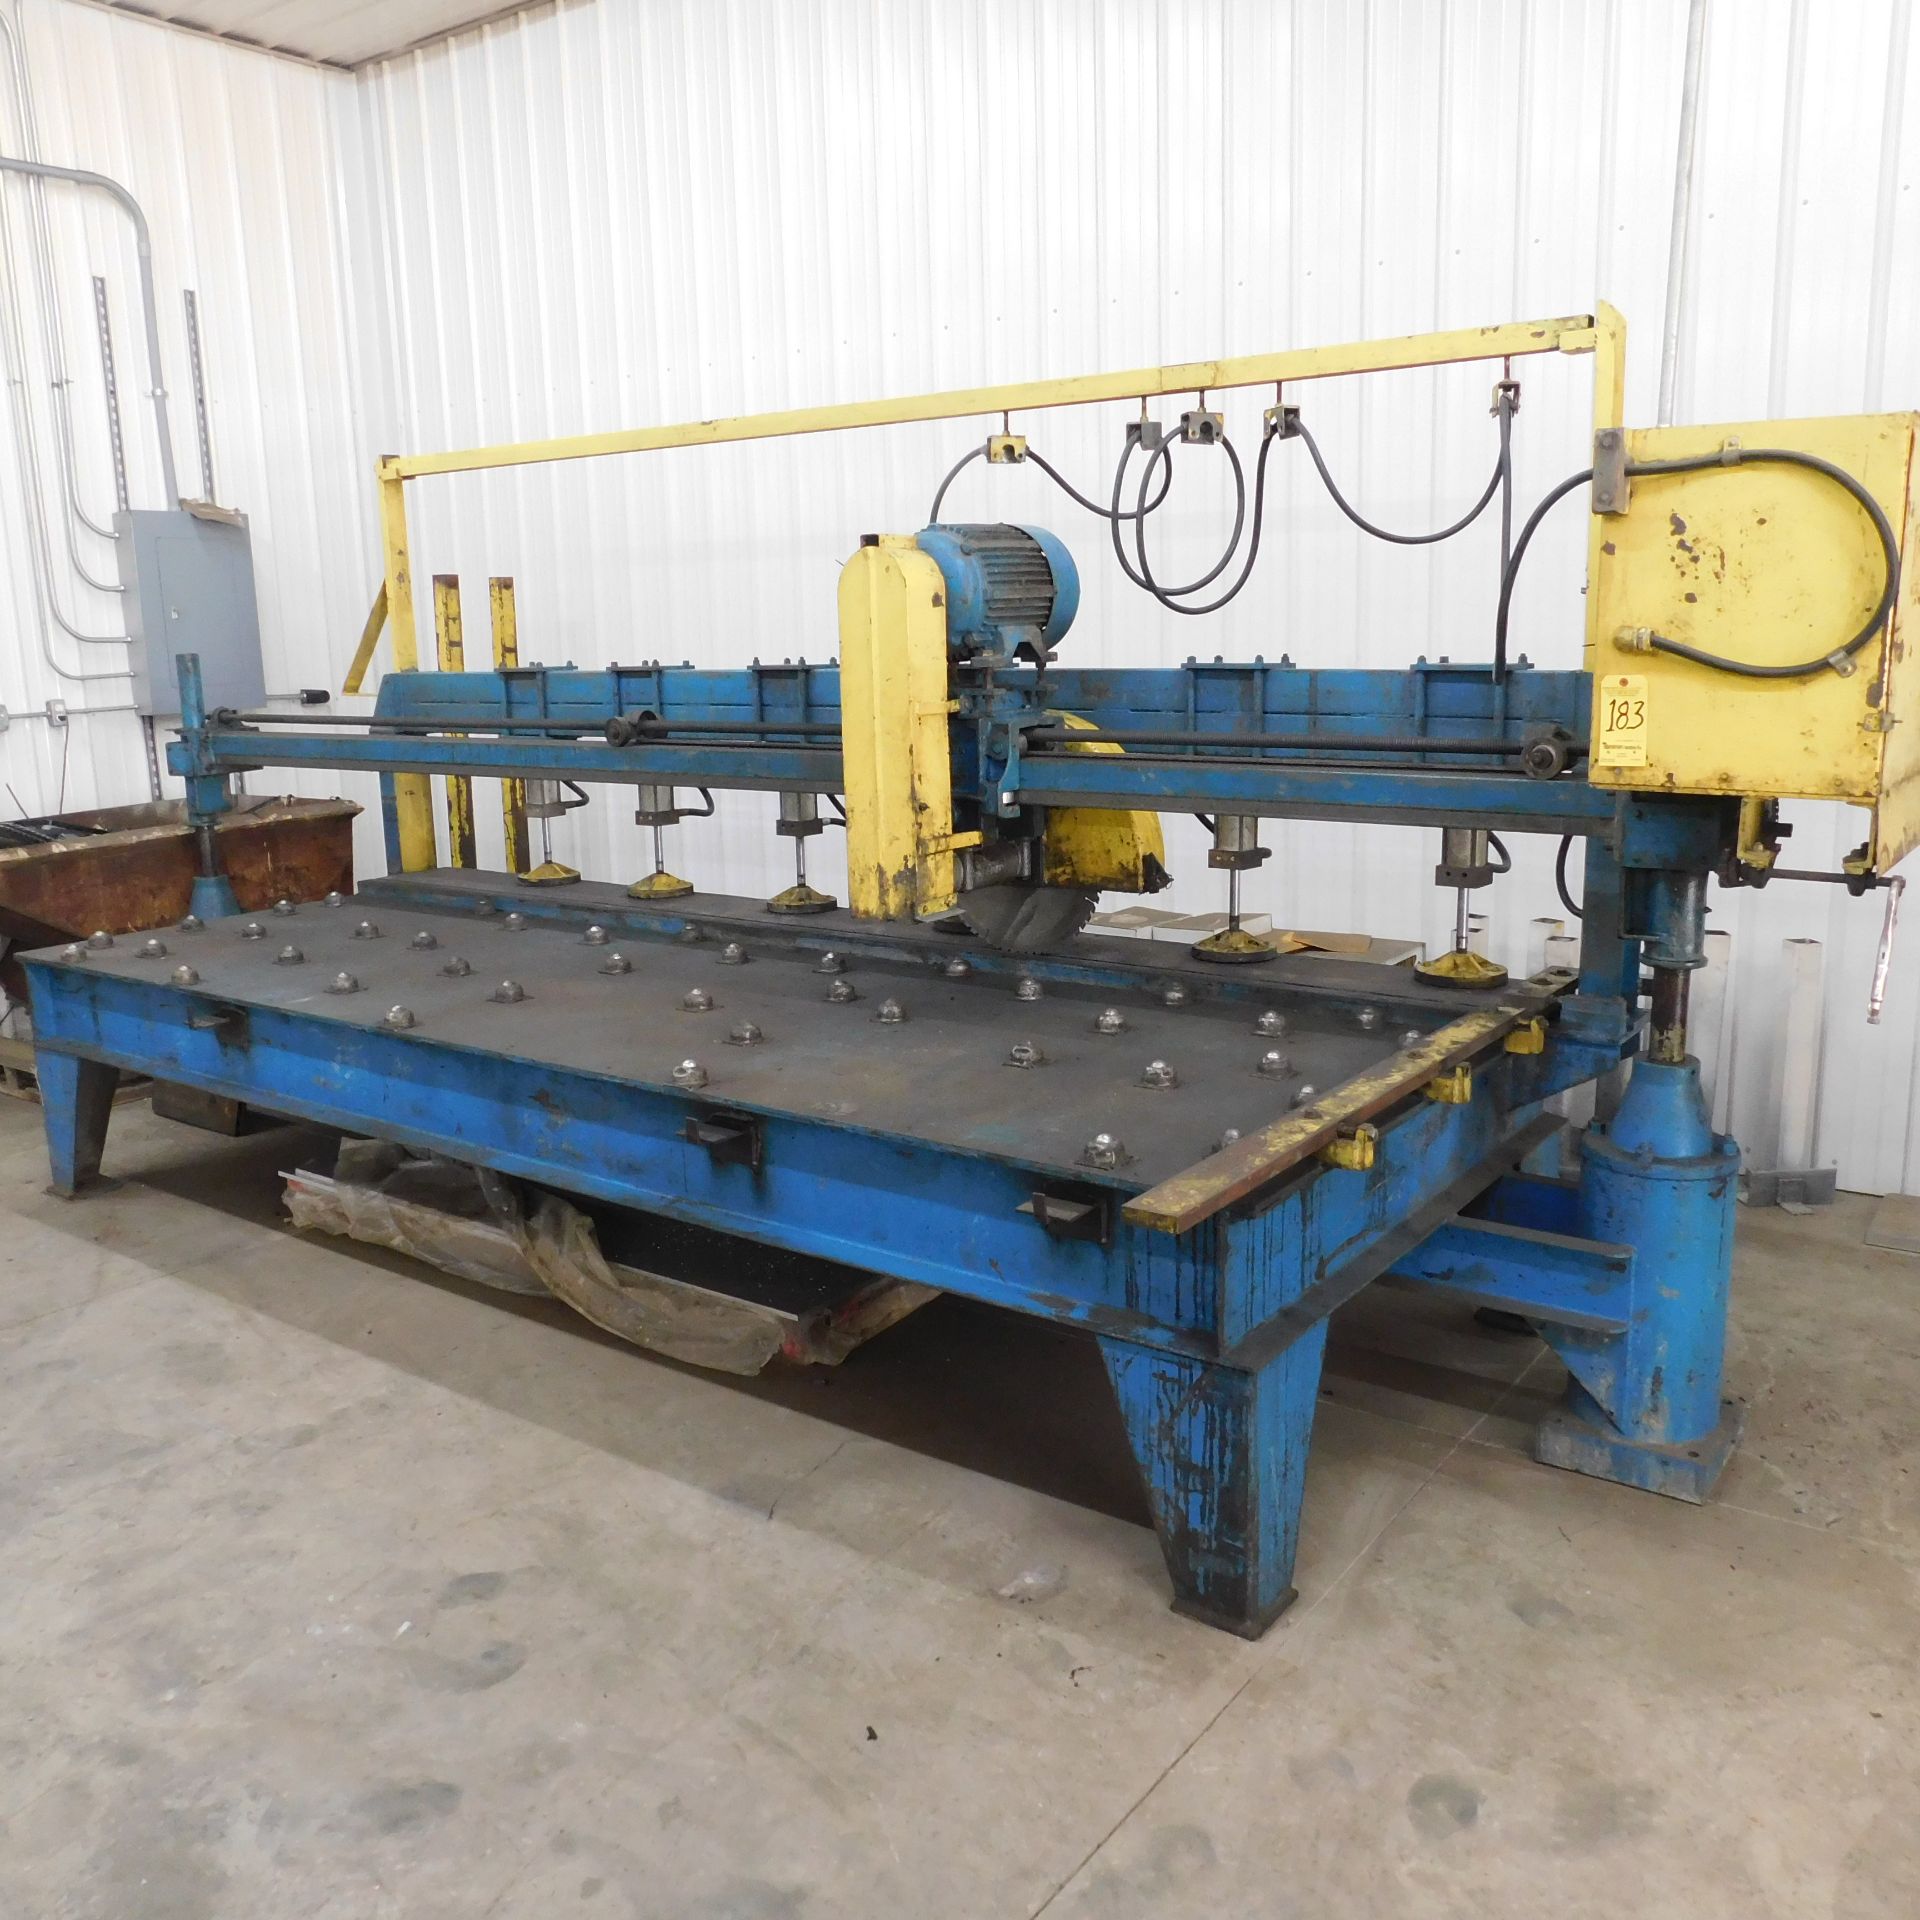 Tysaman 12' Plate Saw, 6" Max. Material Thickness, 20" Blade, Power Head Traverse, Pneumatic